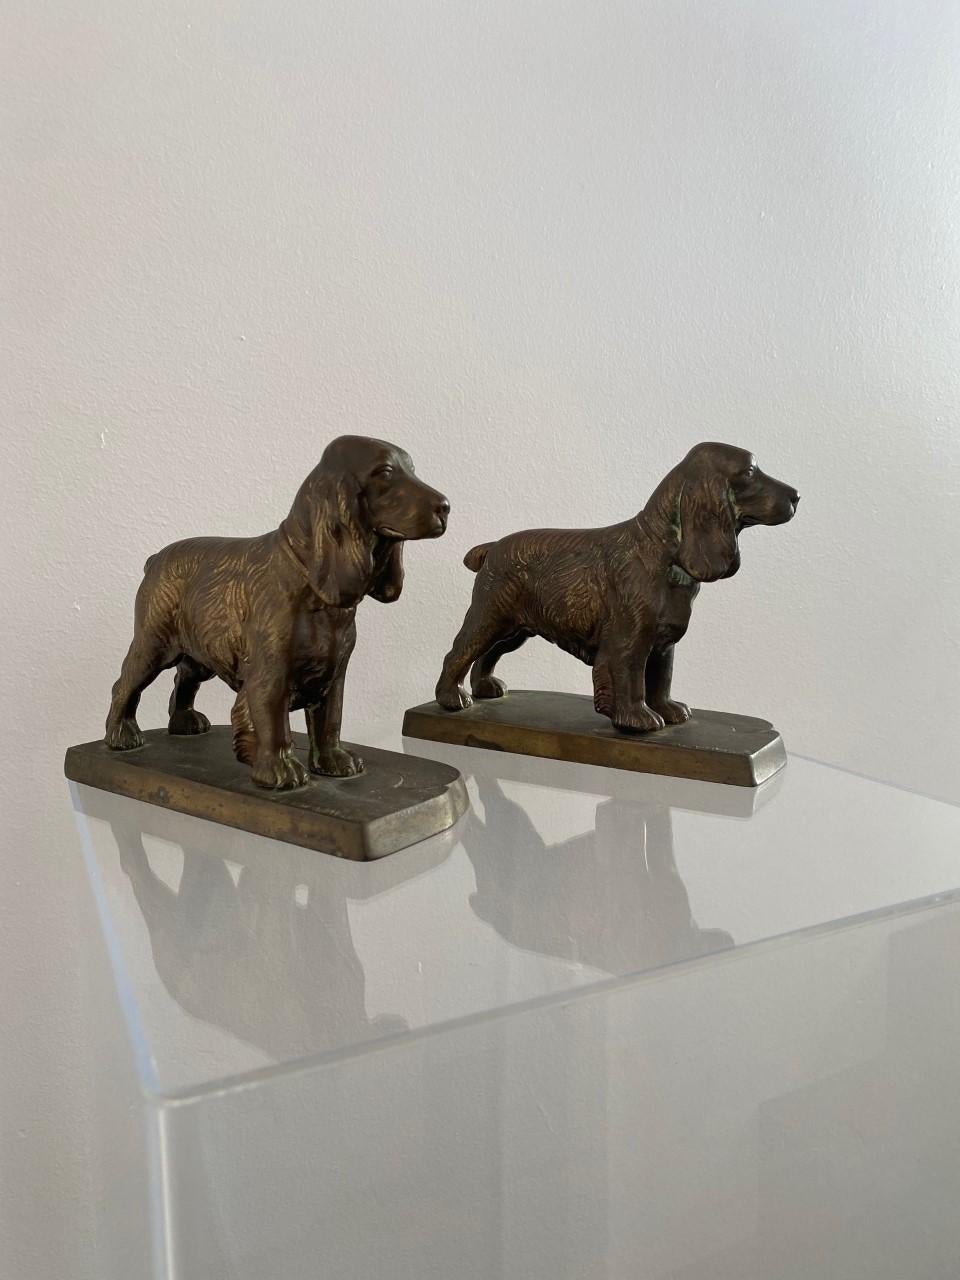 1940s beautifully rendered sculpture bookends of cocker spaniels by Frankart. This pair is endearing and nostalgic. Crafted in brass, these are rendered to bring the sculptures to life. Natural light brings out glimmers of light against the brass